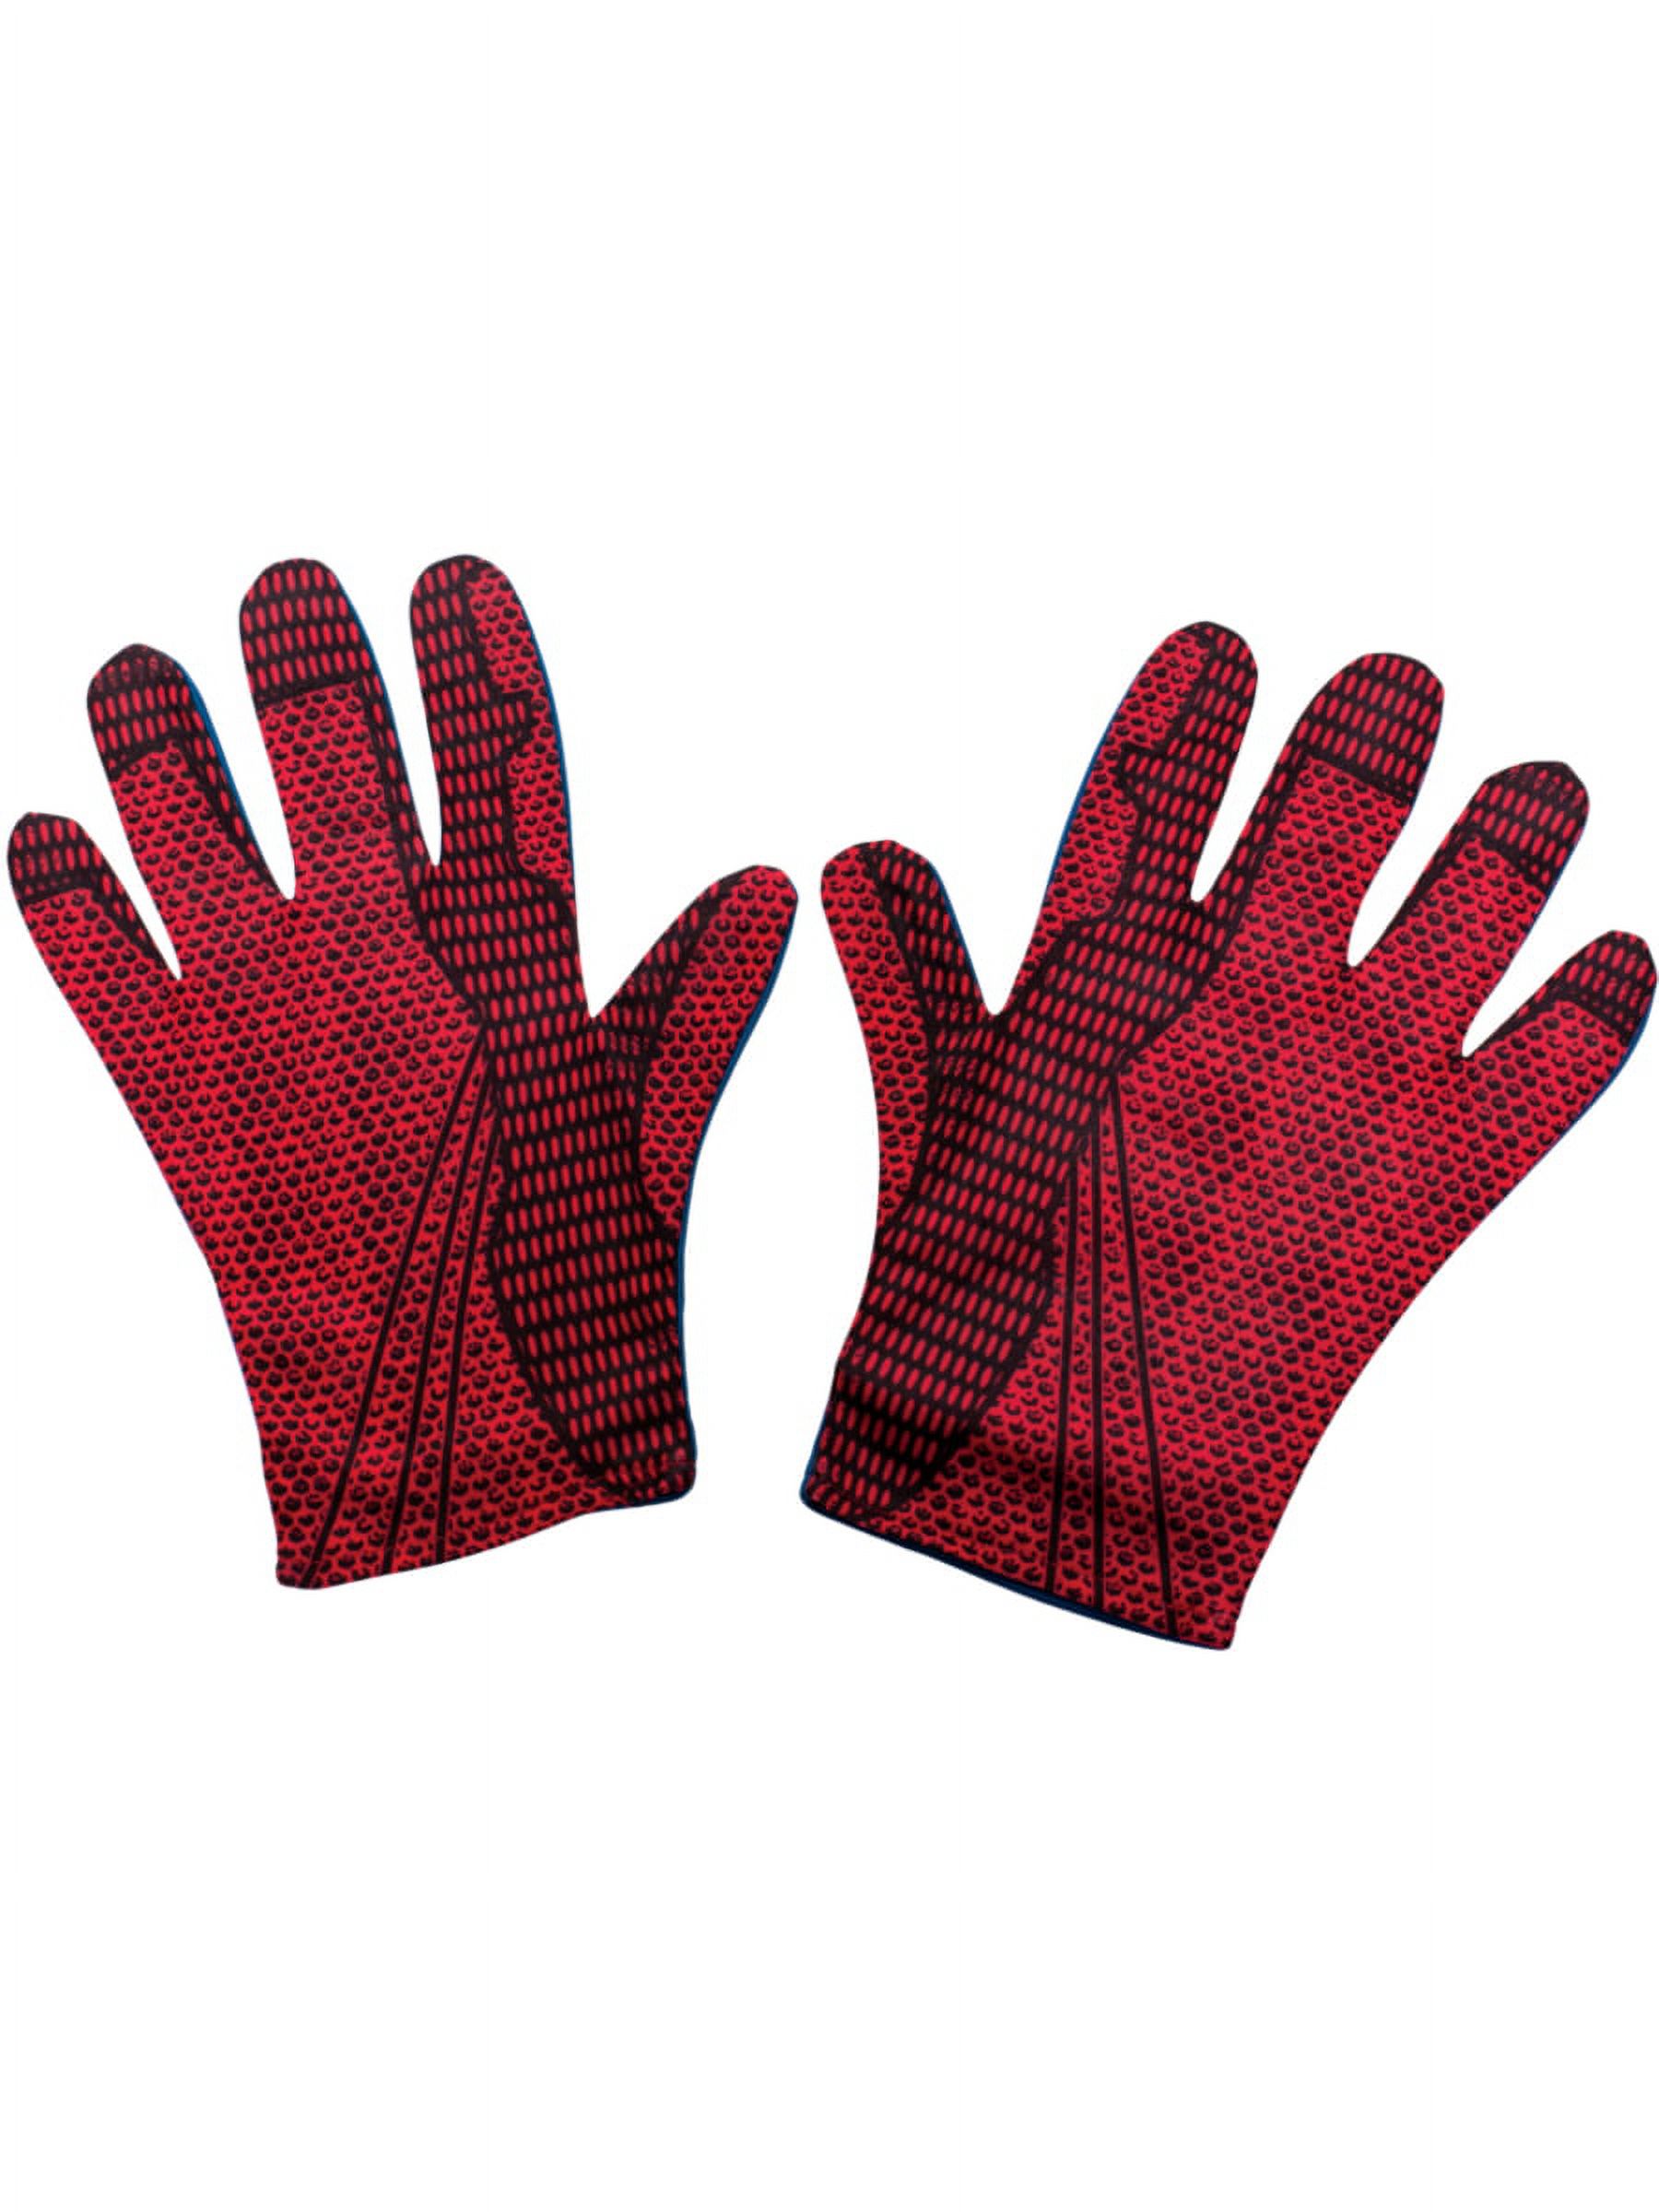 Rubie's Costume Men's The Amazing SpiderMan Adult Gloves, Red, One Size - image 2 of 2